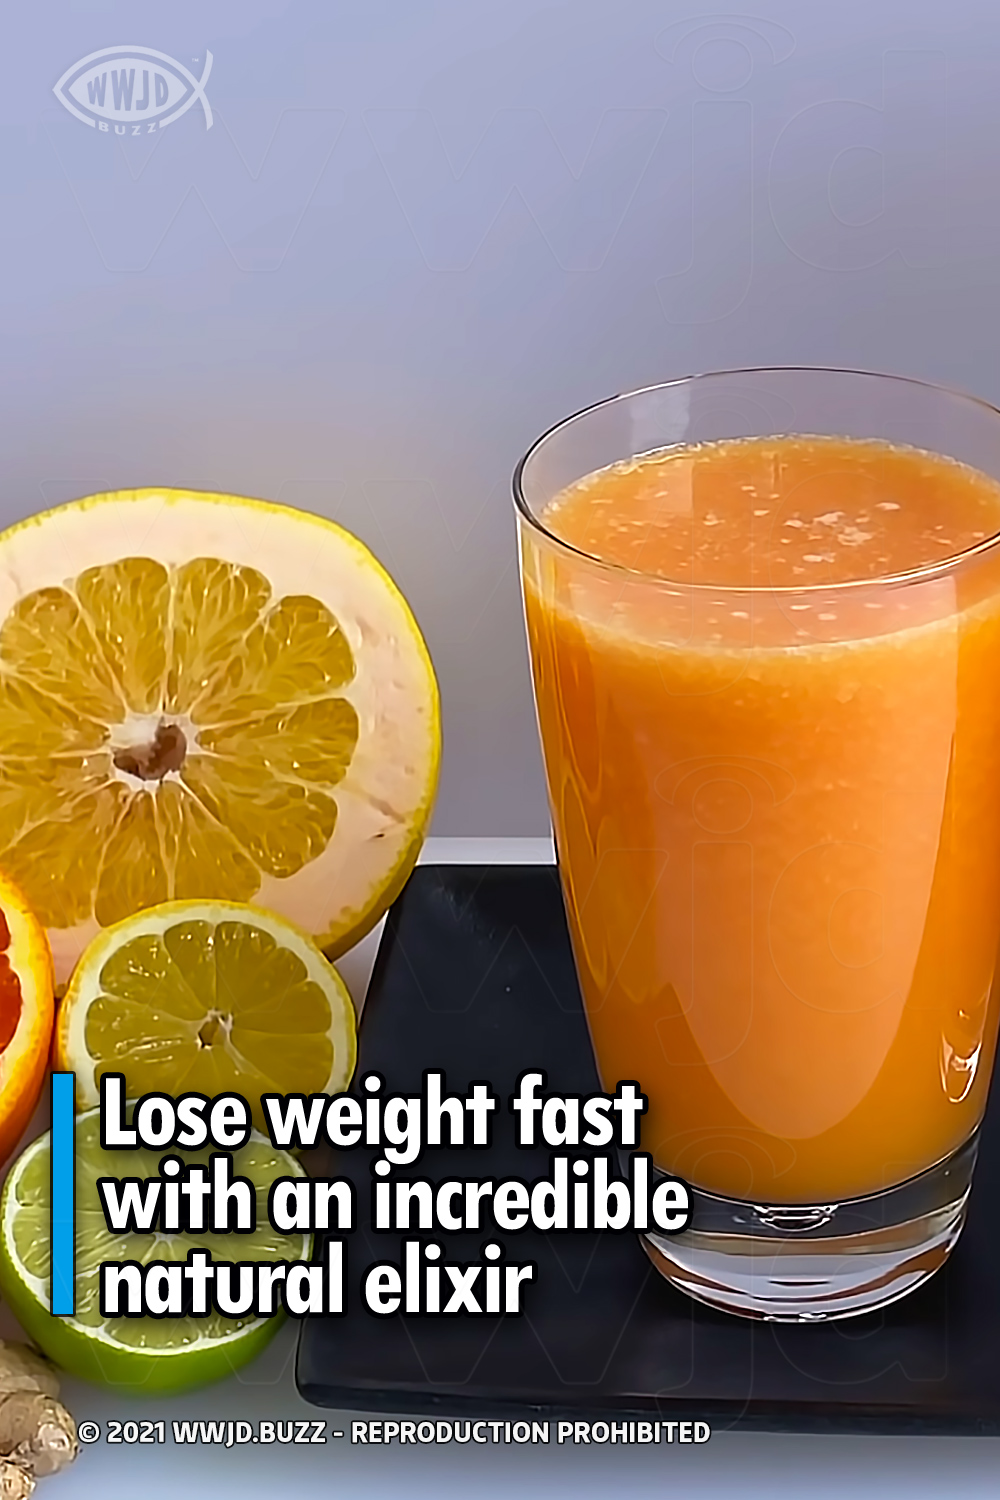 Lose weight fast with an incredible natural elixir